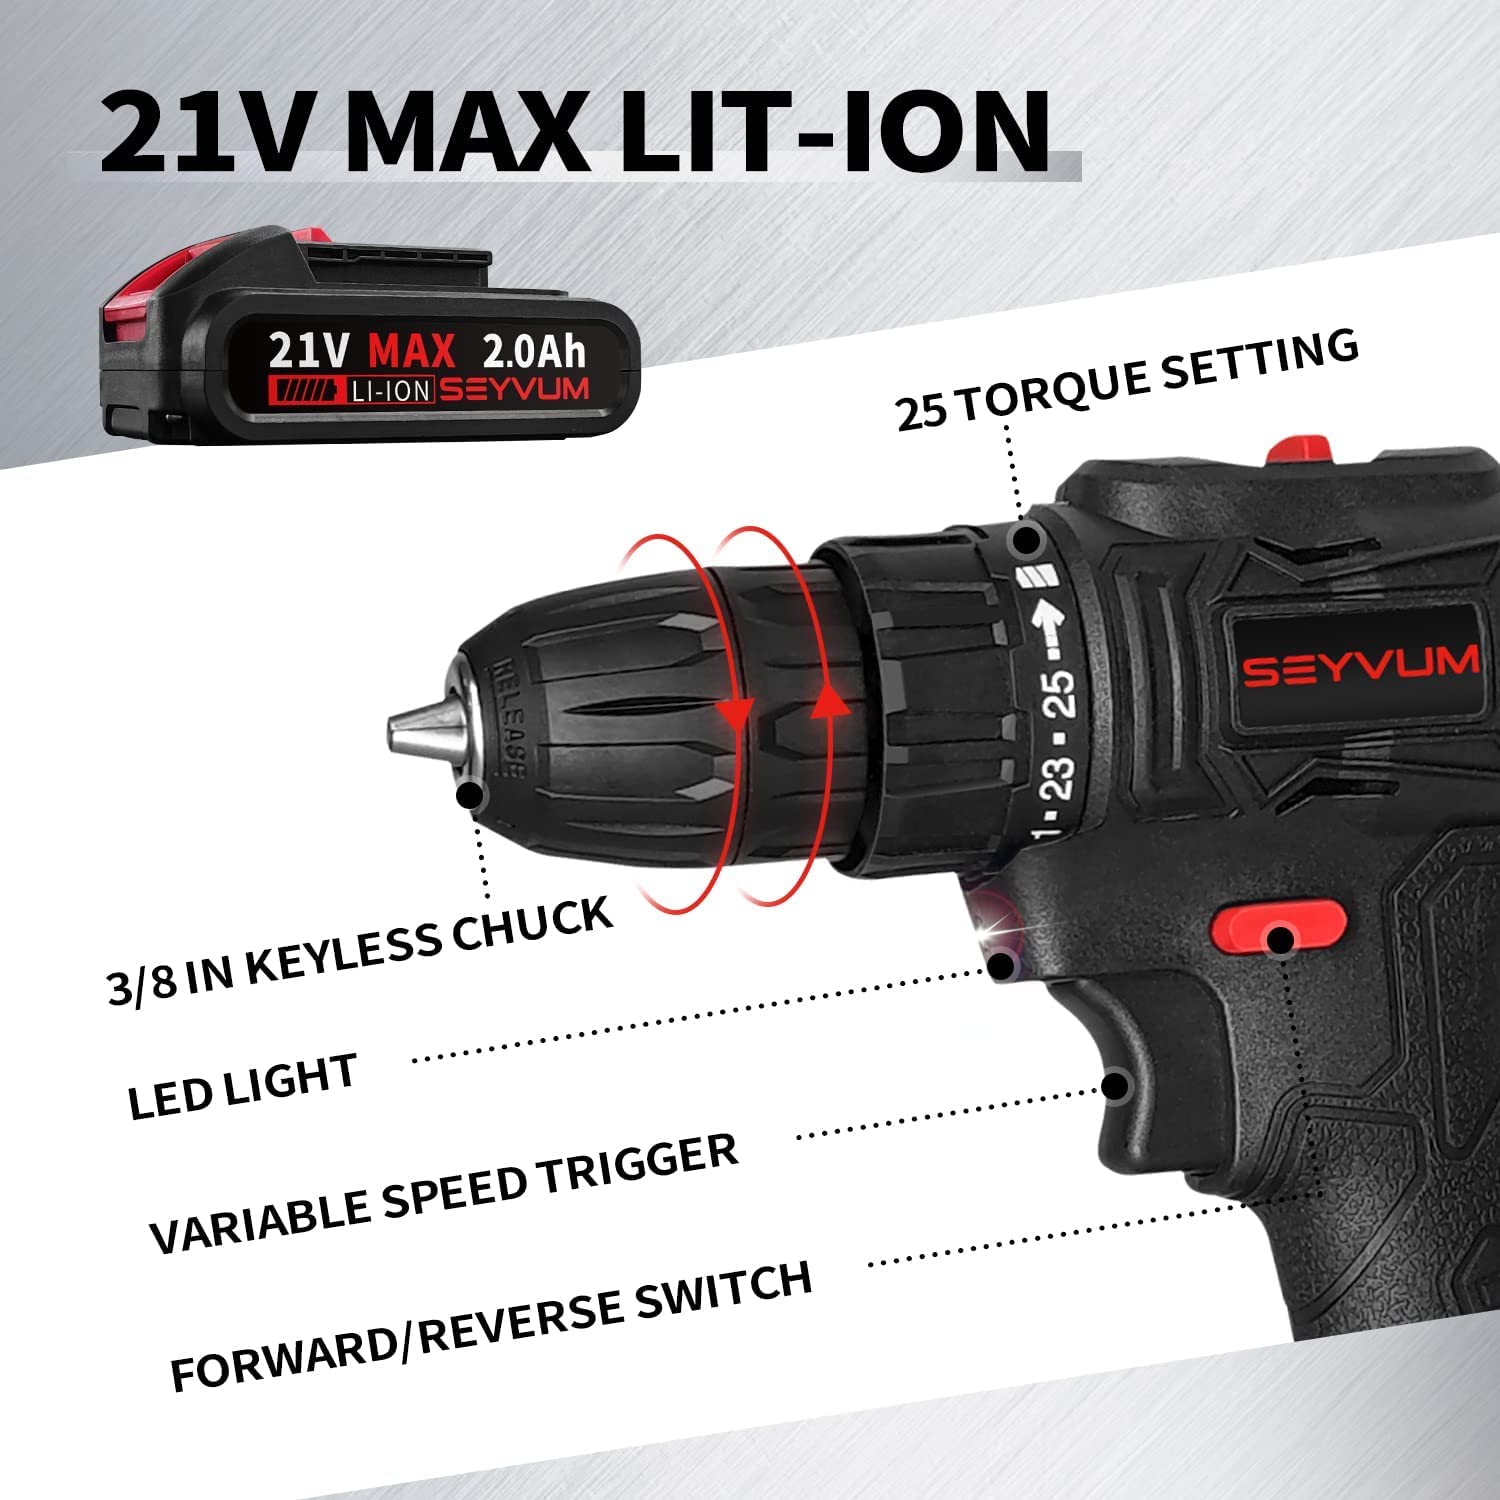 SEYVUM P10 21V Cordless Drill Set, [Powerful Brushless Motor] [Compact], Power Drill Driver, Electric Drill with Li-ion Battery, Fast Charger, Variable Speed, 57pcs Drill Bits with Tool Bag